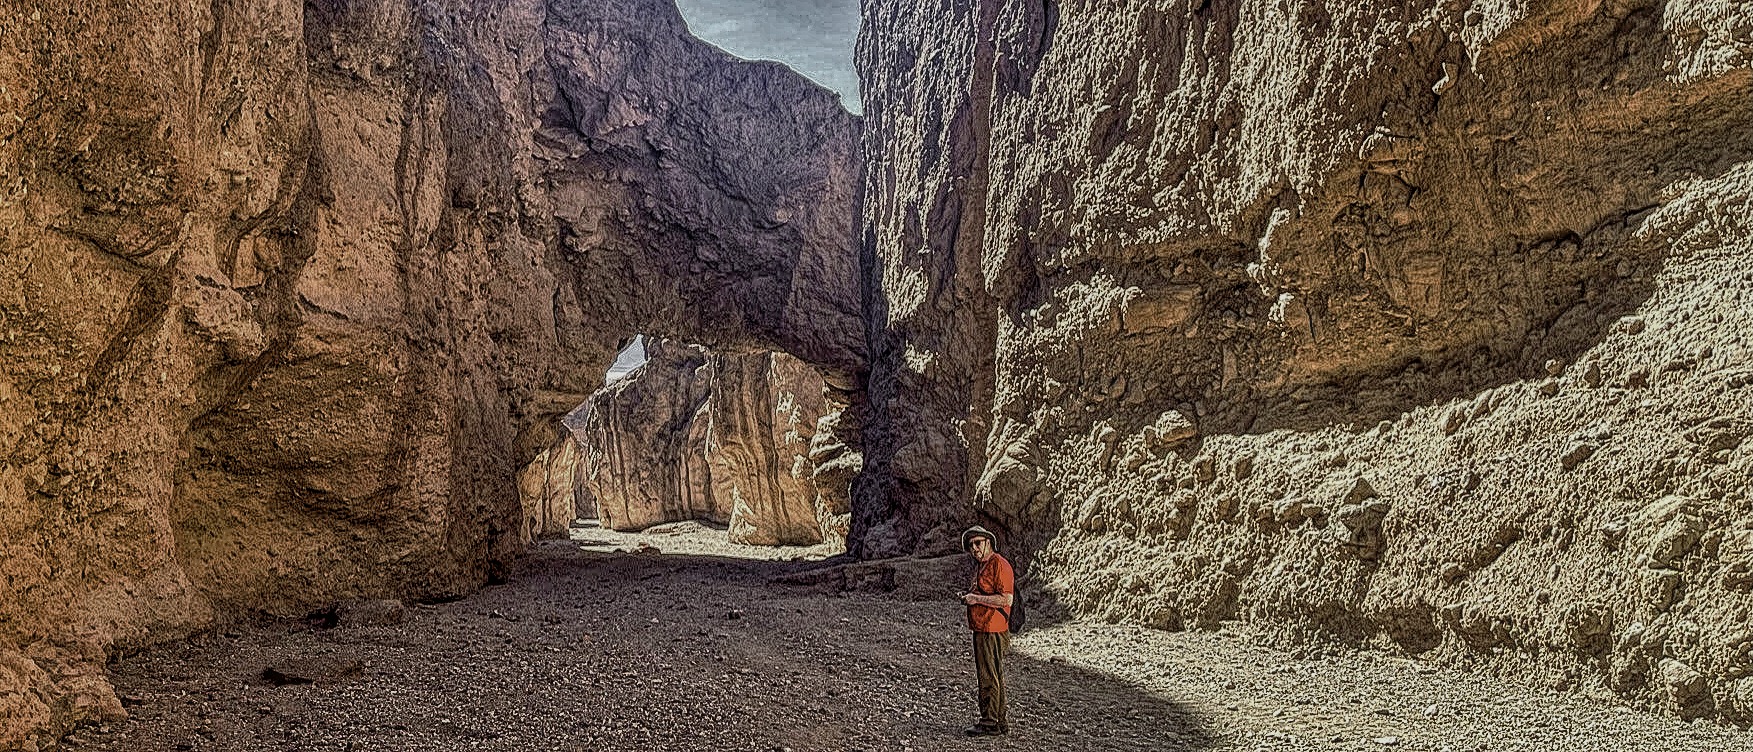 Man in red shirt standing near a natural rock bridge in Death Valley, California